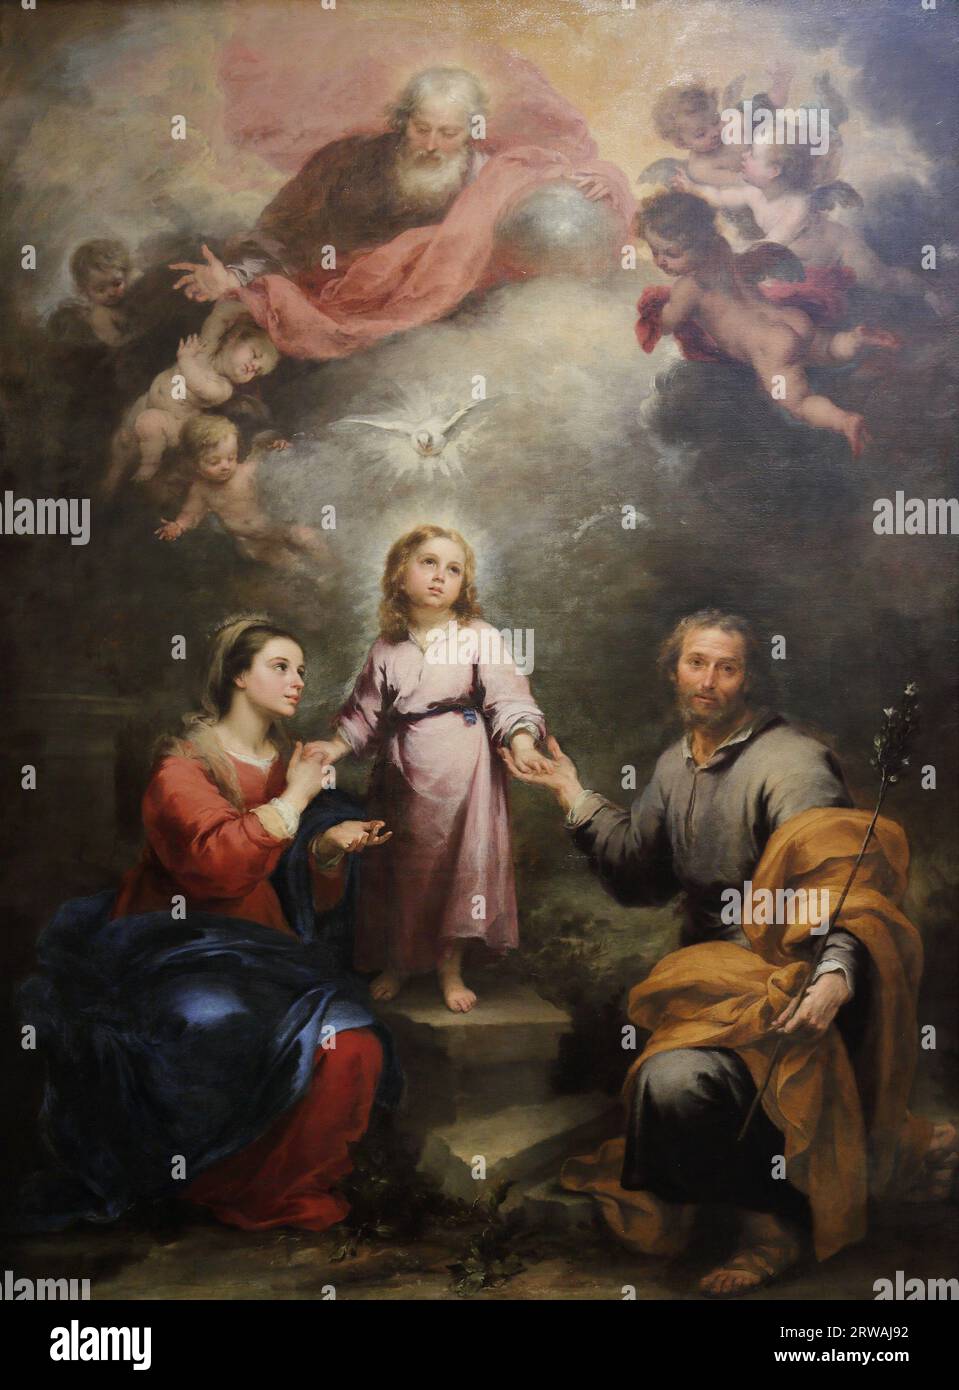 The Heavenly and Earthly Trinity by Spanish Baroque painter Bartholome Esteban Murillo at the National Gallery, London, UK Stock Photo